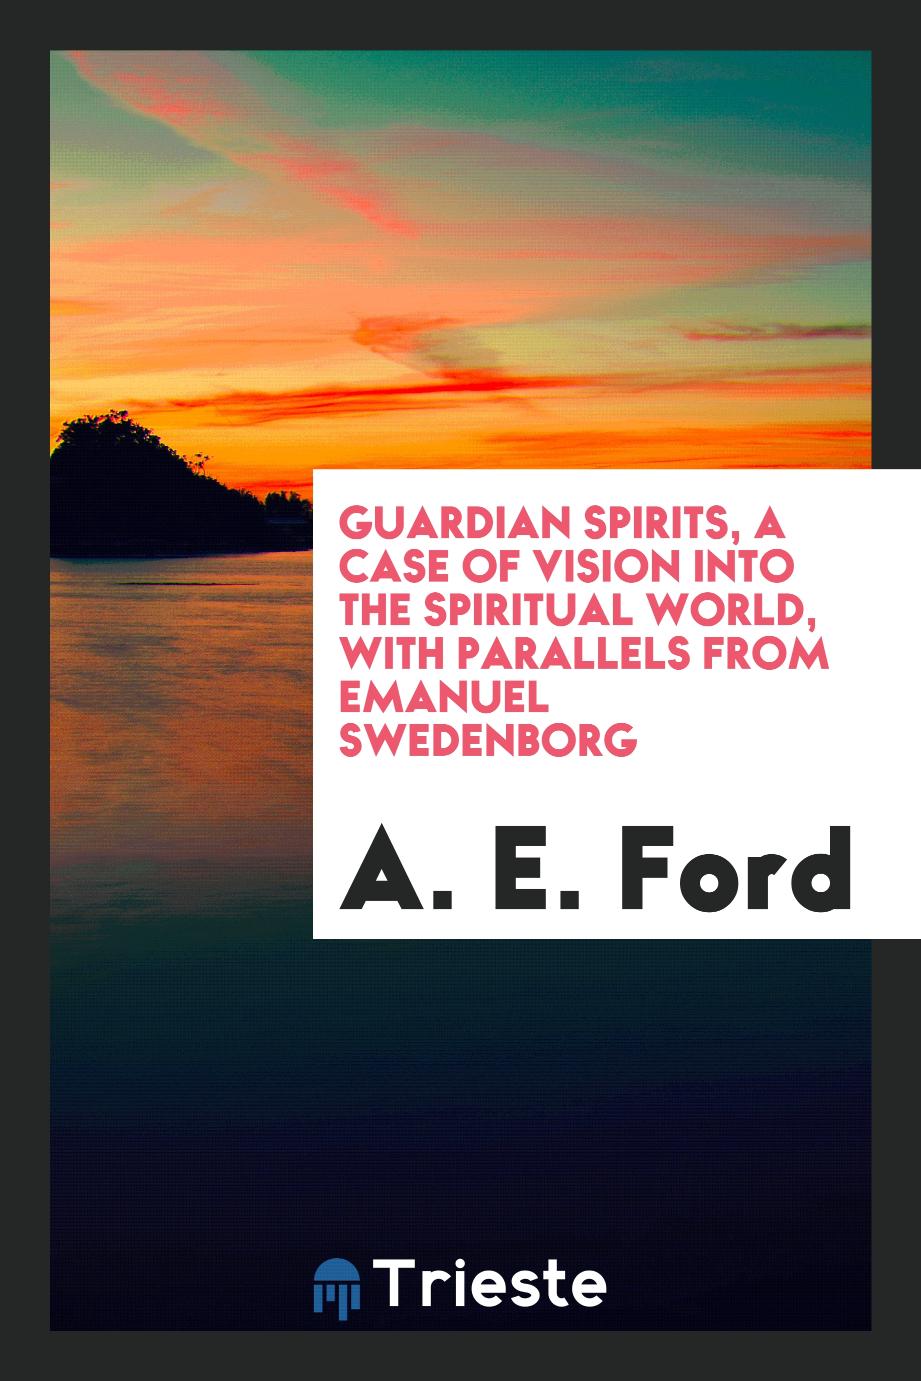 Guardian spirits, a case of vision into the spiritual world, with parallels from Emanuel Swedenborg